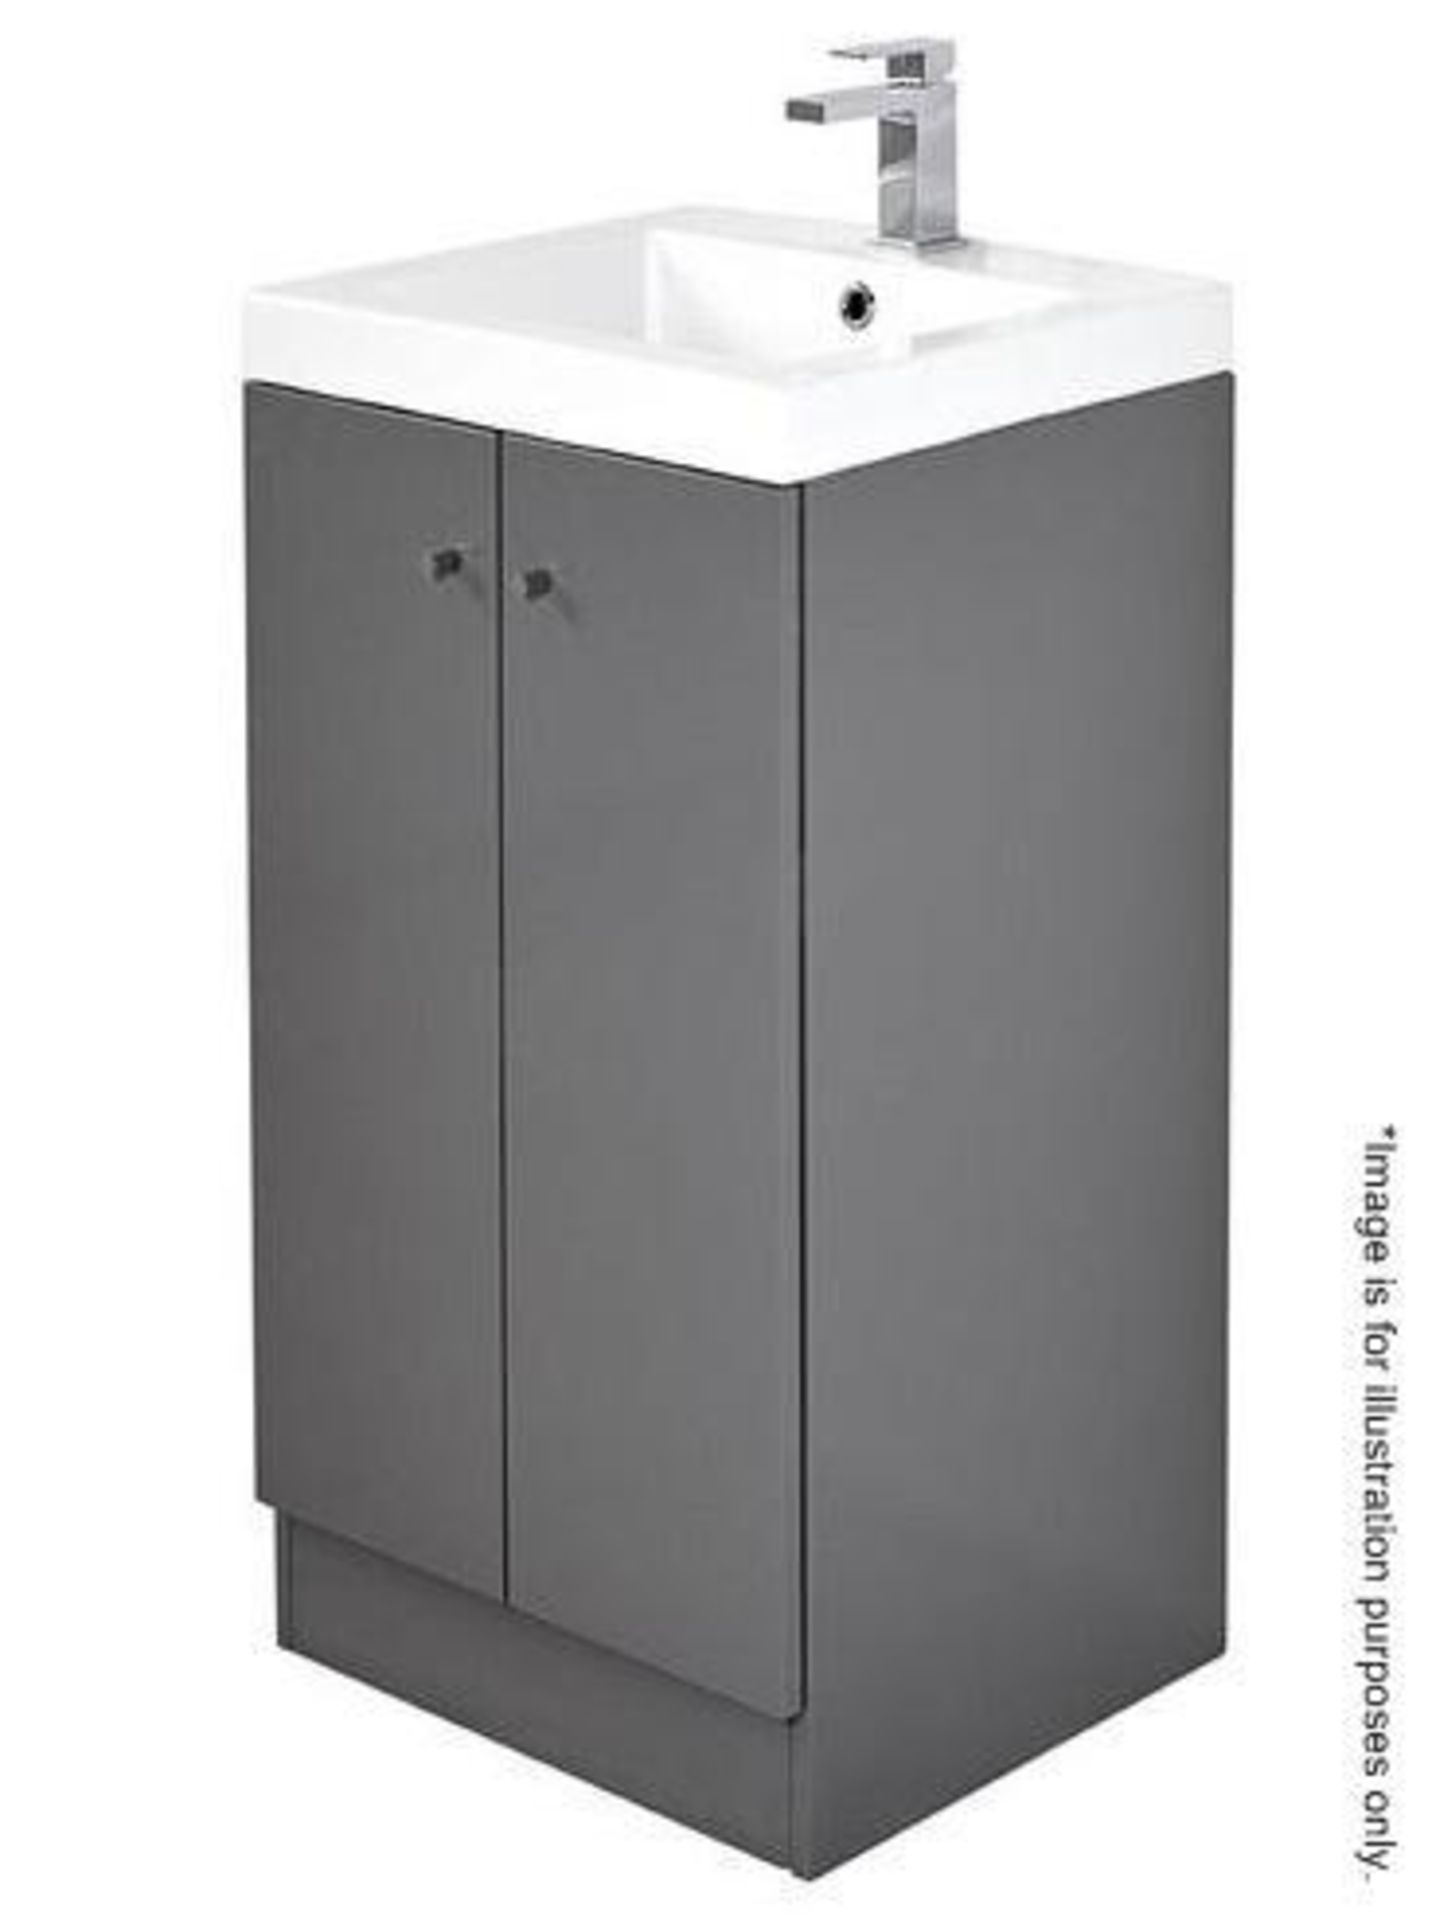 7 x Alpine Duo 400 Floorstanding Vanity Units In Gloss Grey - Brand New Boxed Stock - Dimensions: H8 - Image 2 of 3